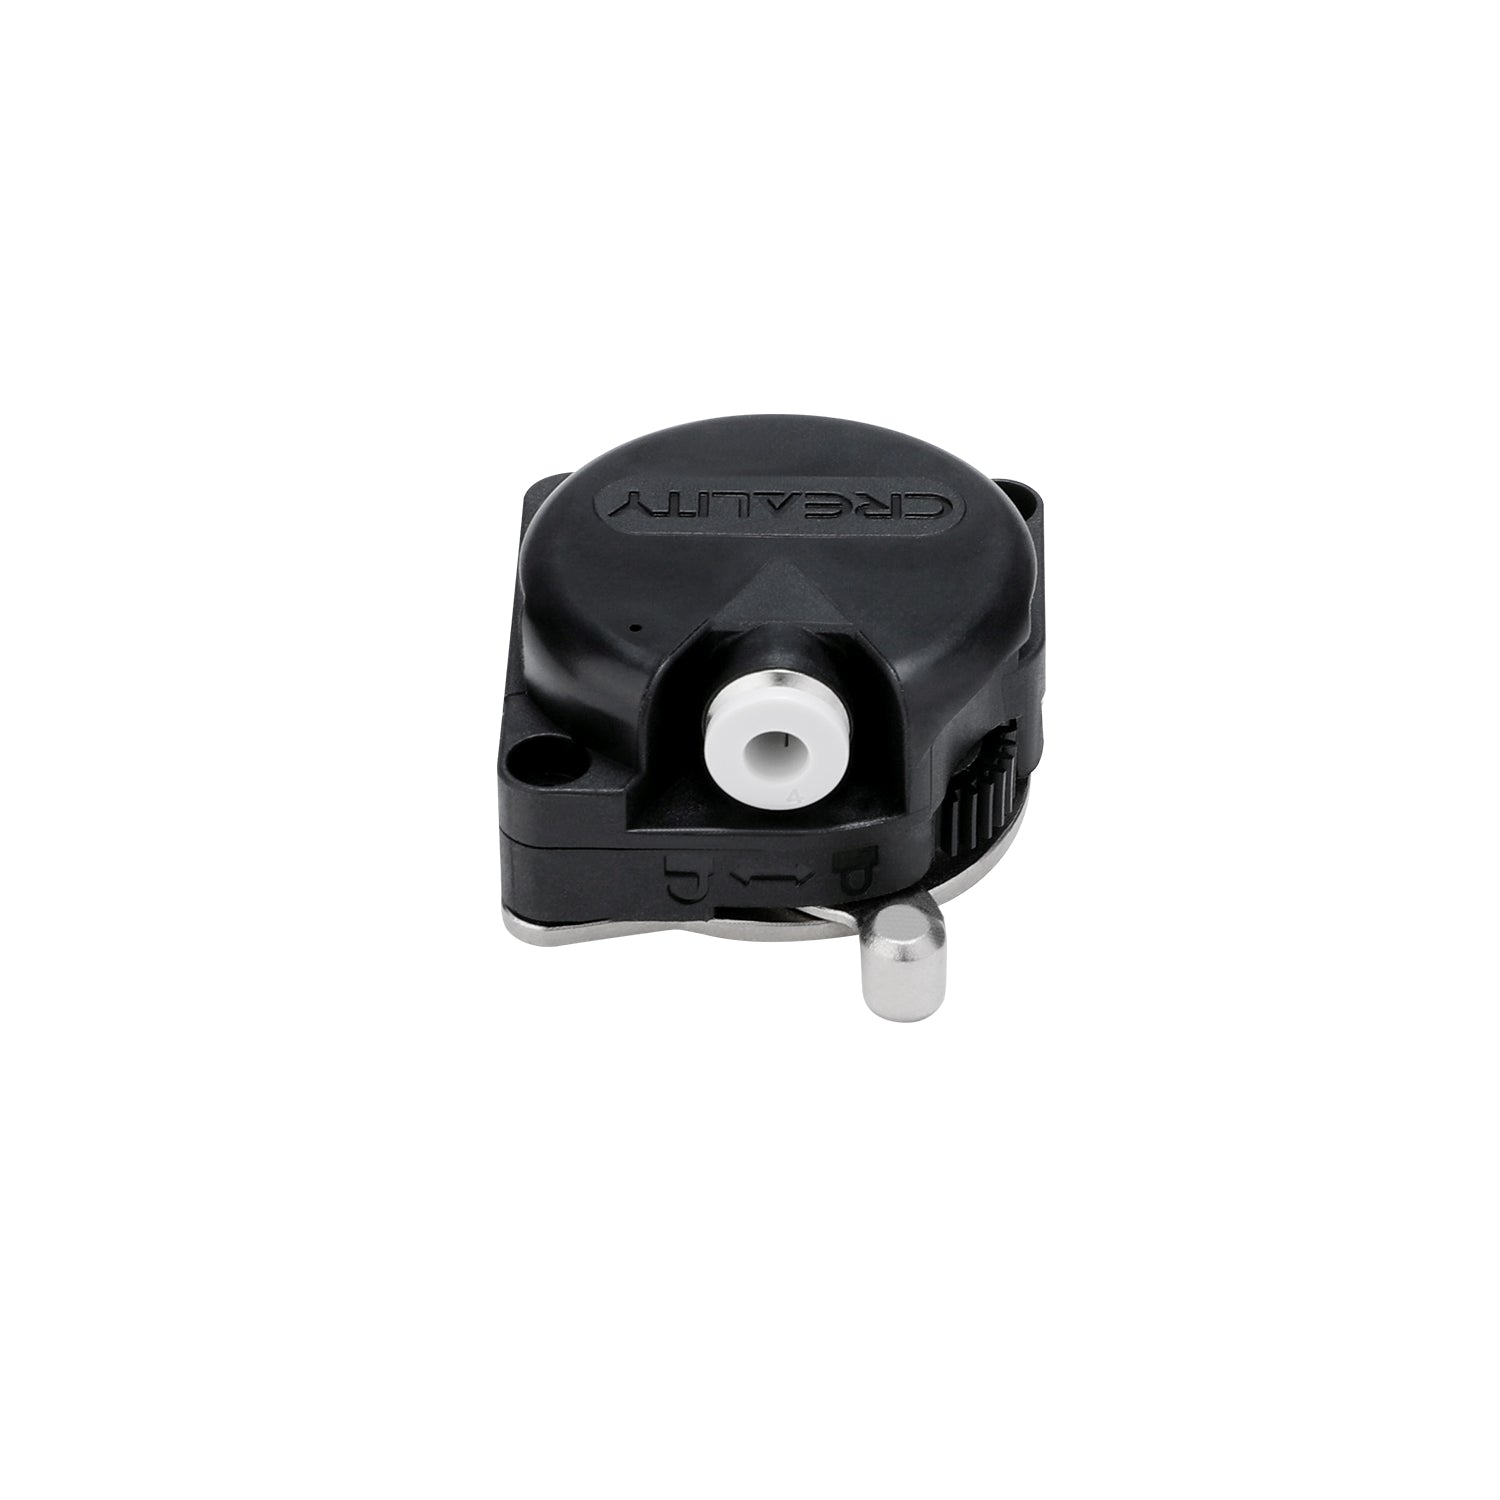 Creality K1/K1 Max Replacement Extruder Only (no motor)